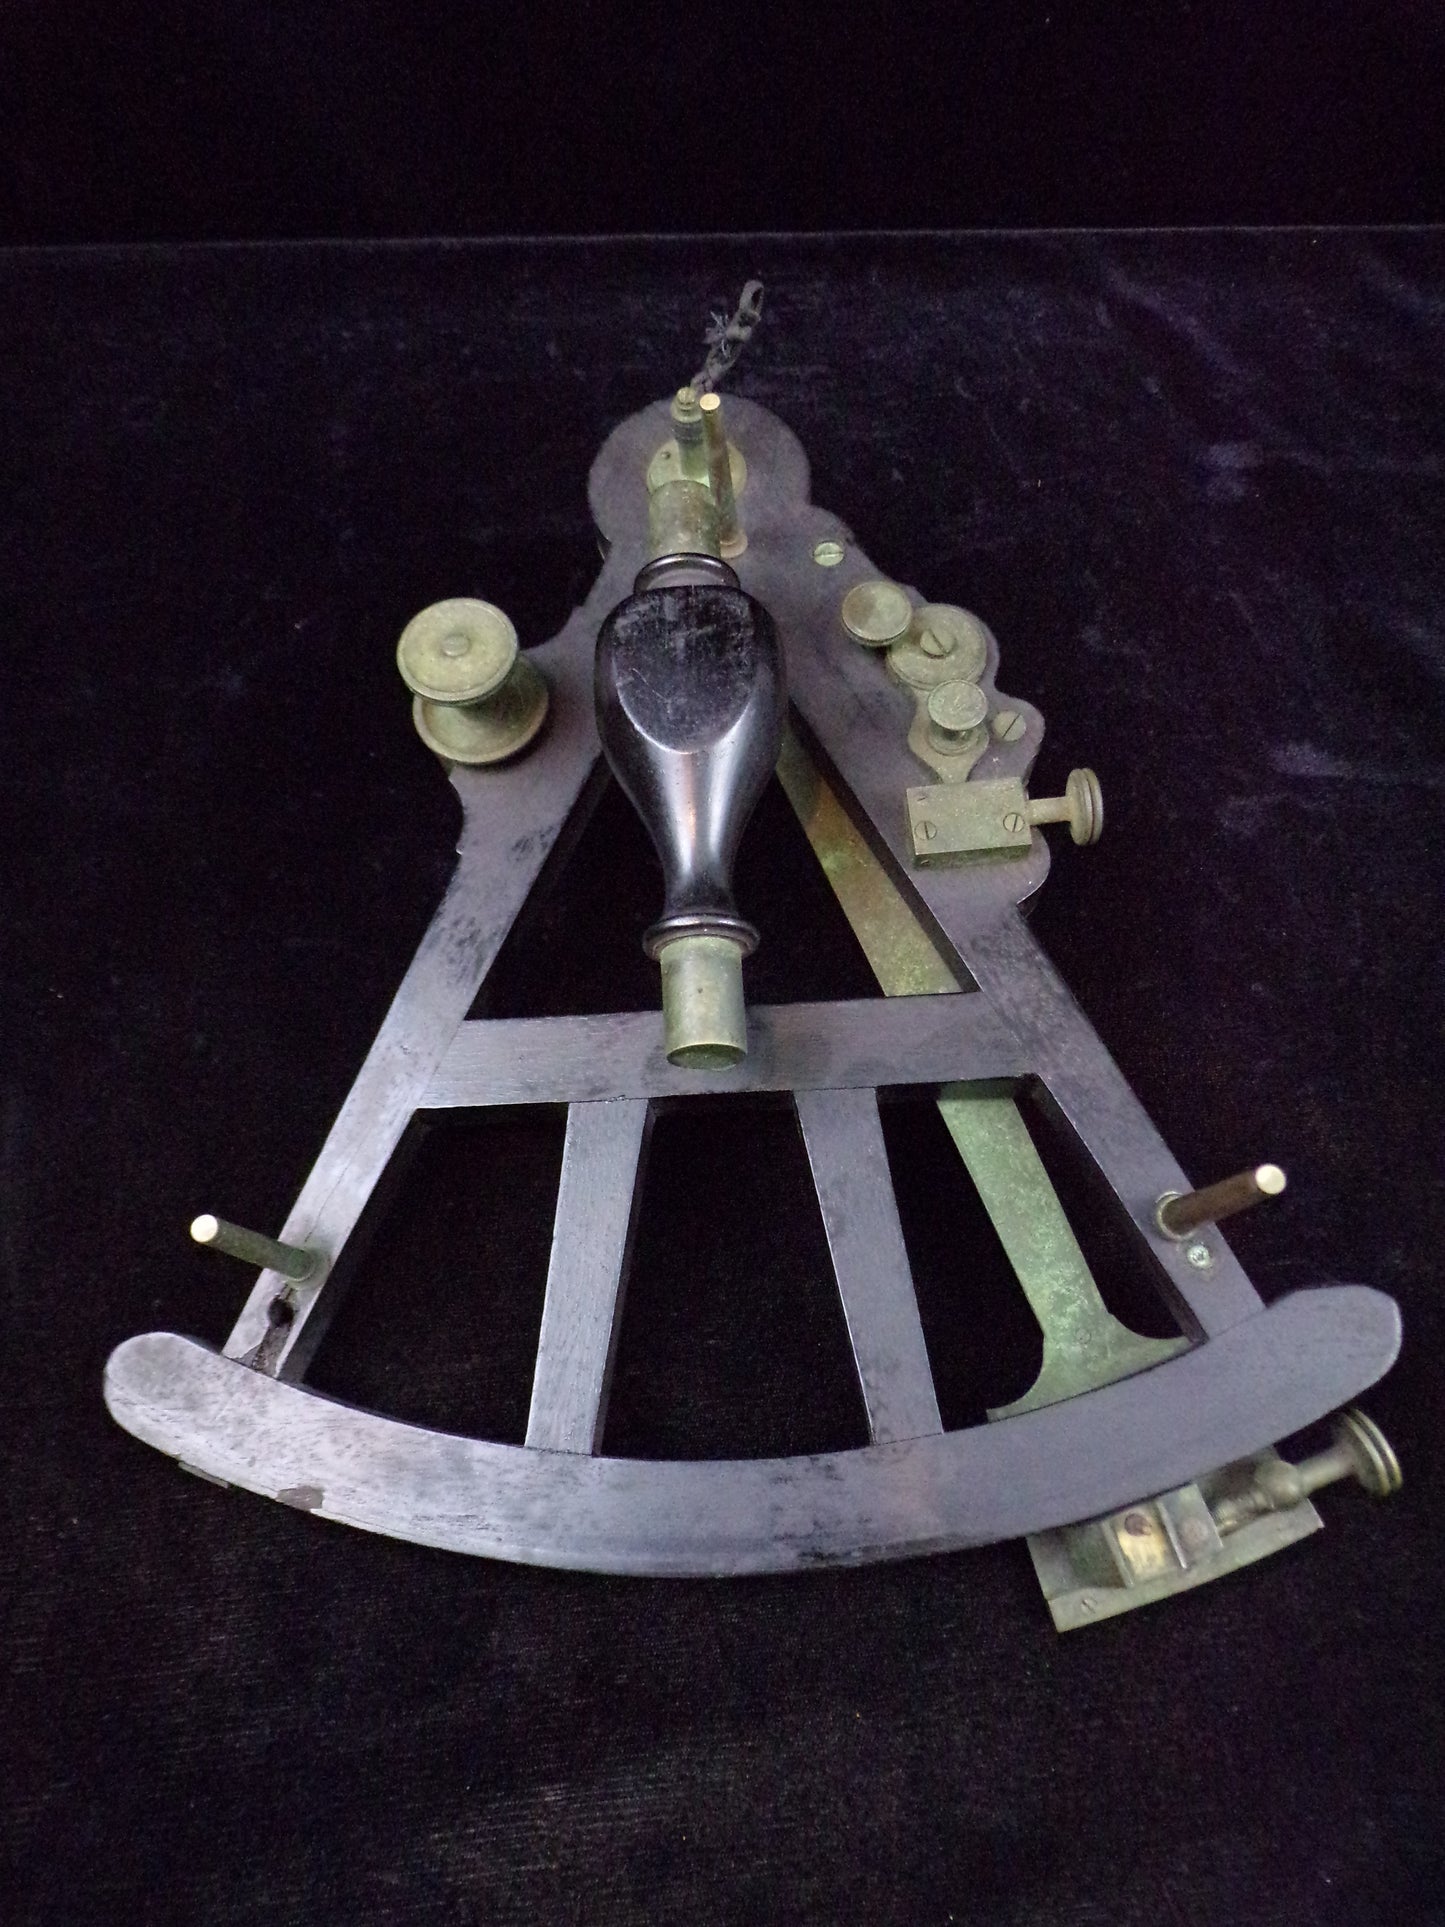 Octant (Quadrant) made by Dring & Fage, London